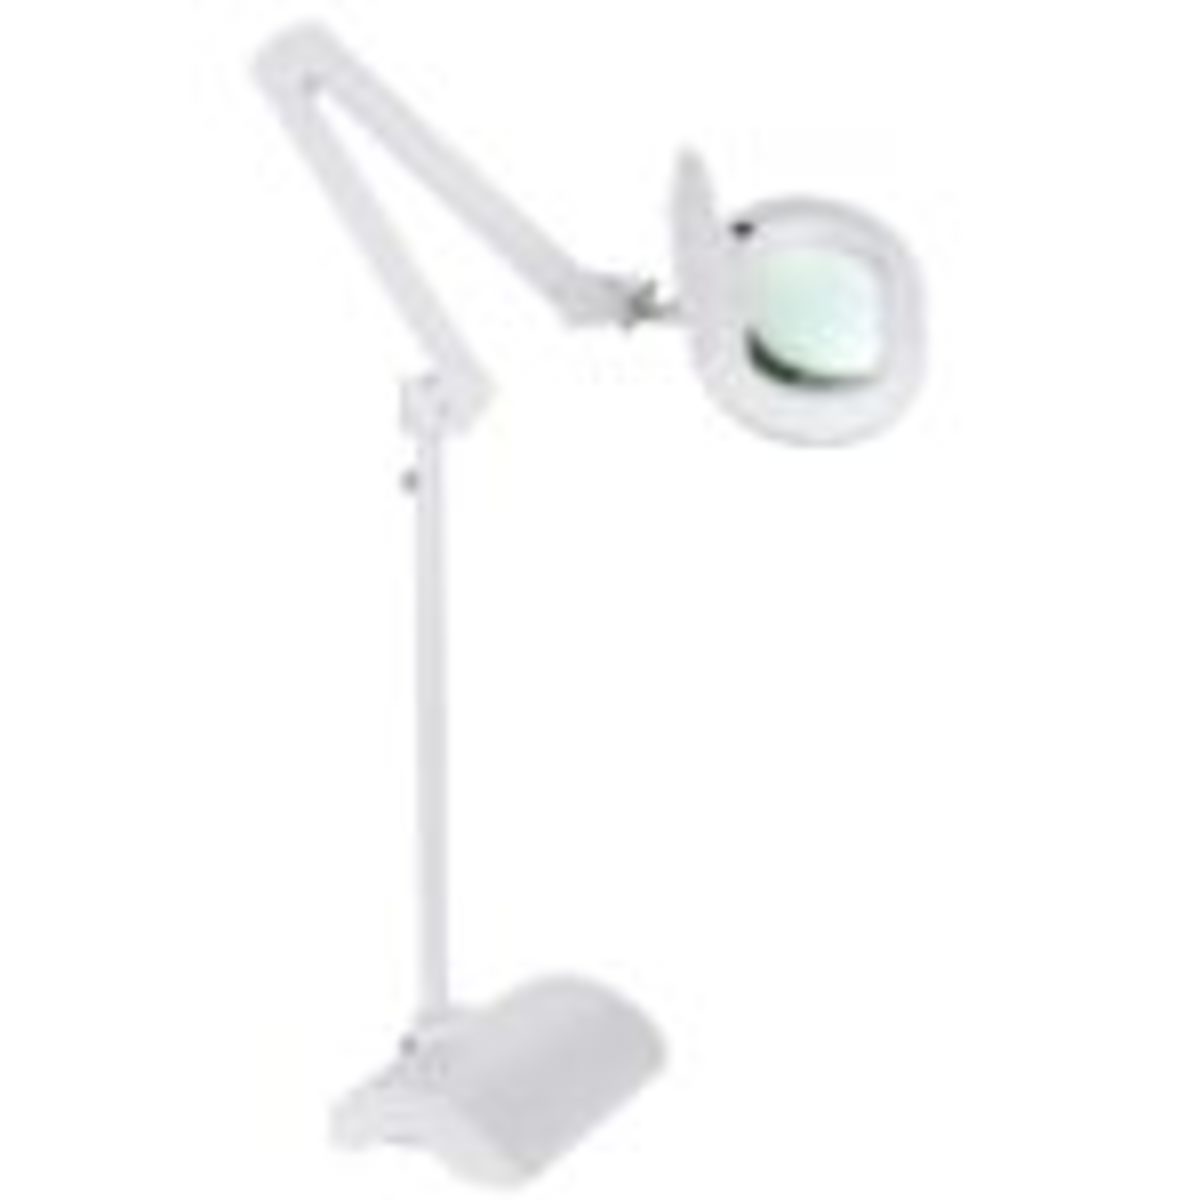 LightView XL 2in1 magnifying lamp from Brightech.